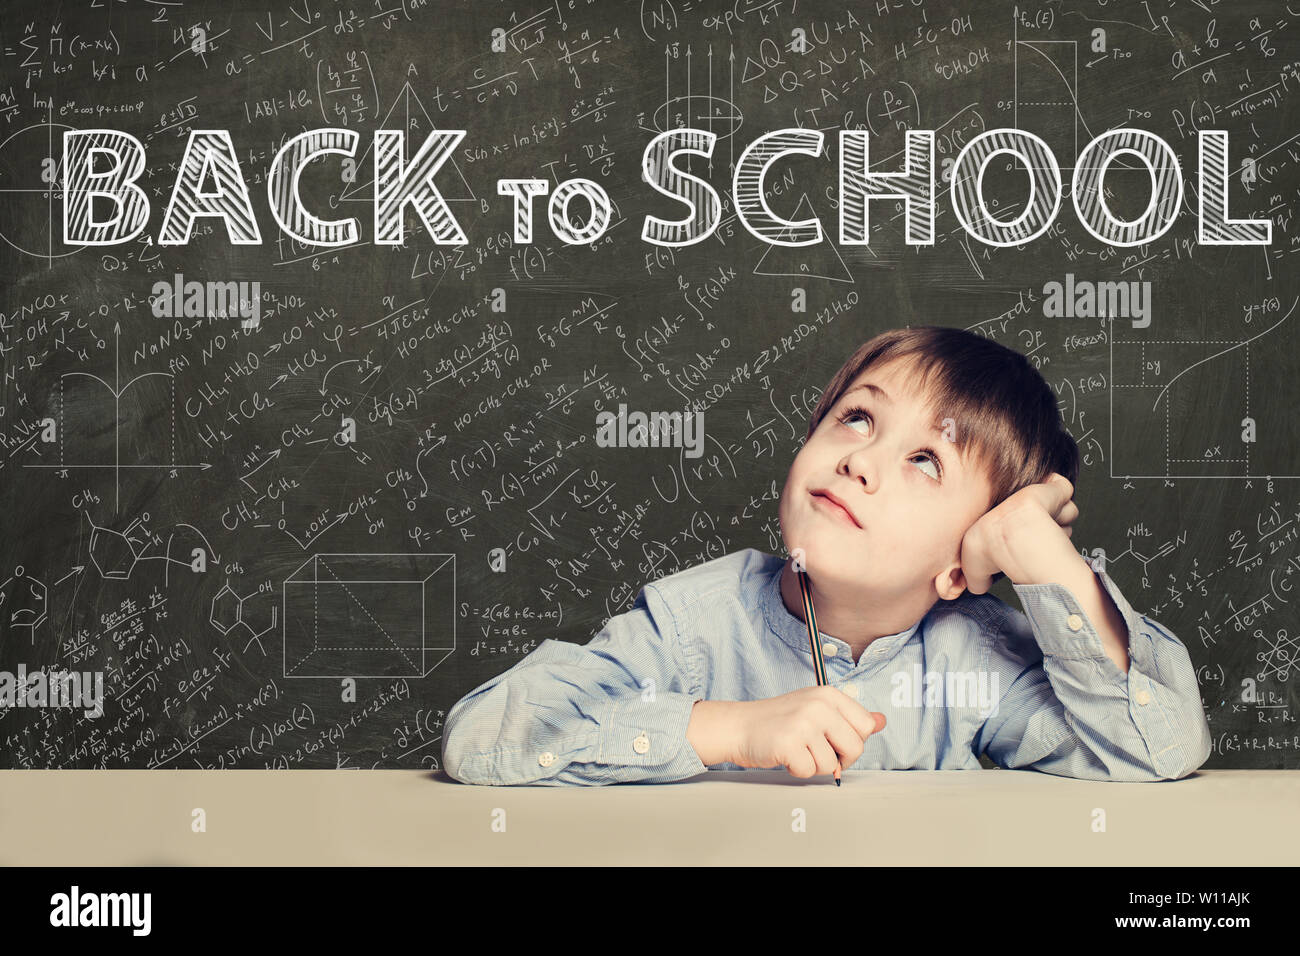 Back to school text and happy kid on chalkboard background Stock Photo